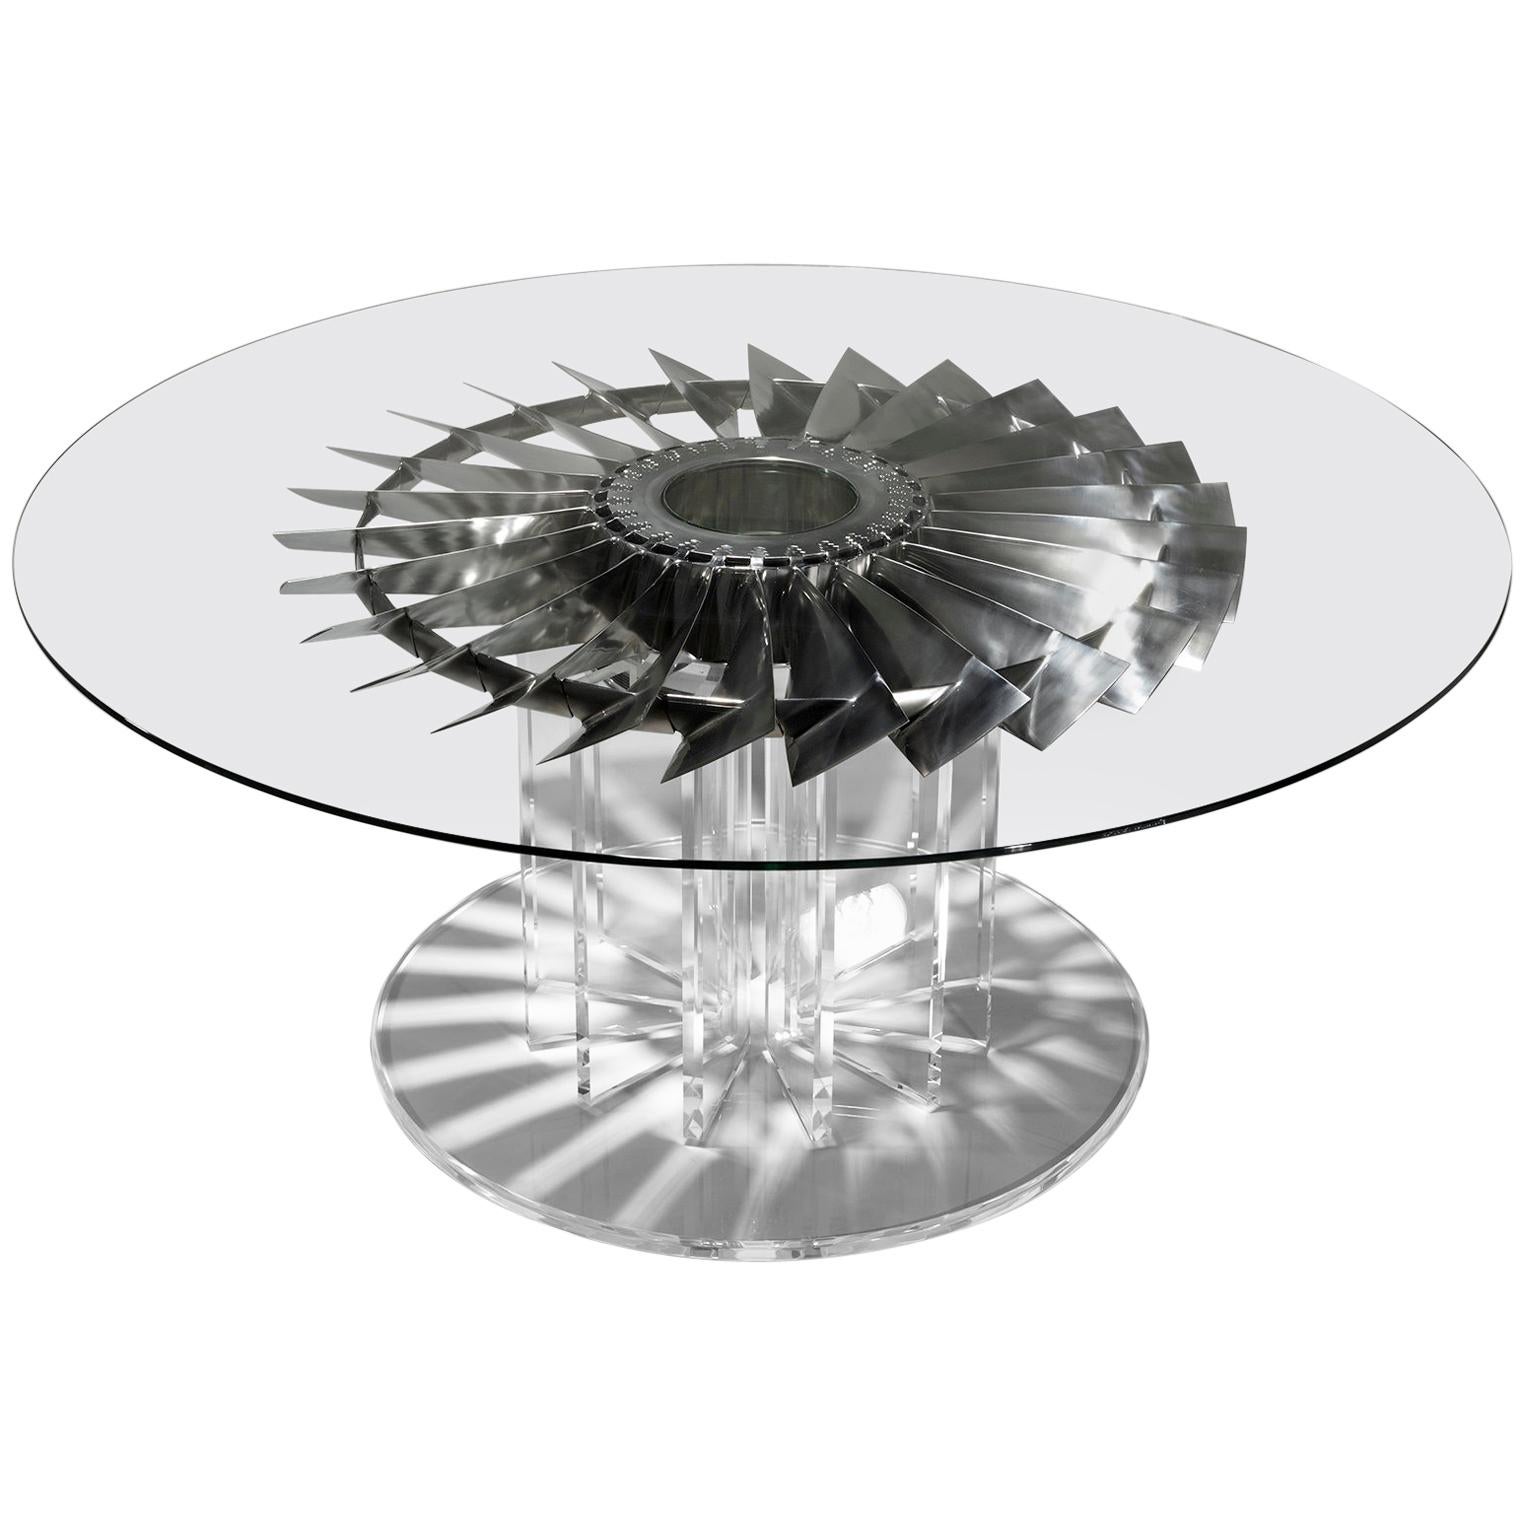 Rolls Royce Sea Harrier Jump Jet Dining / Centre Table For Sale